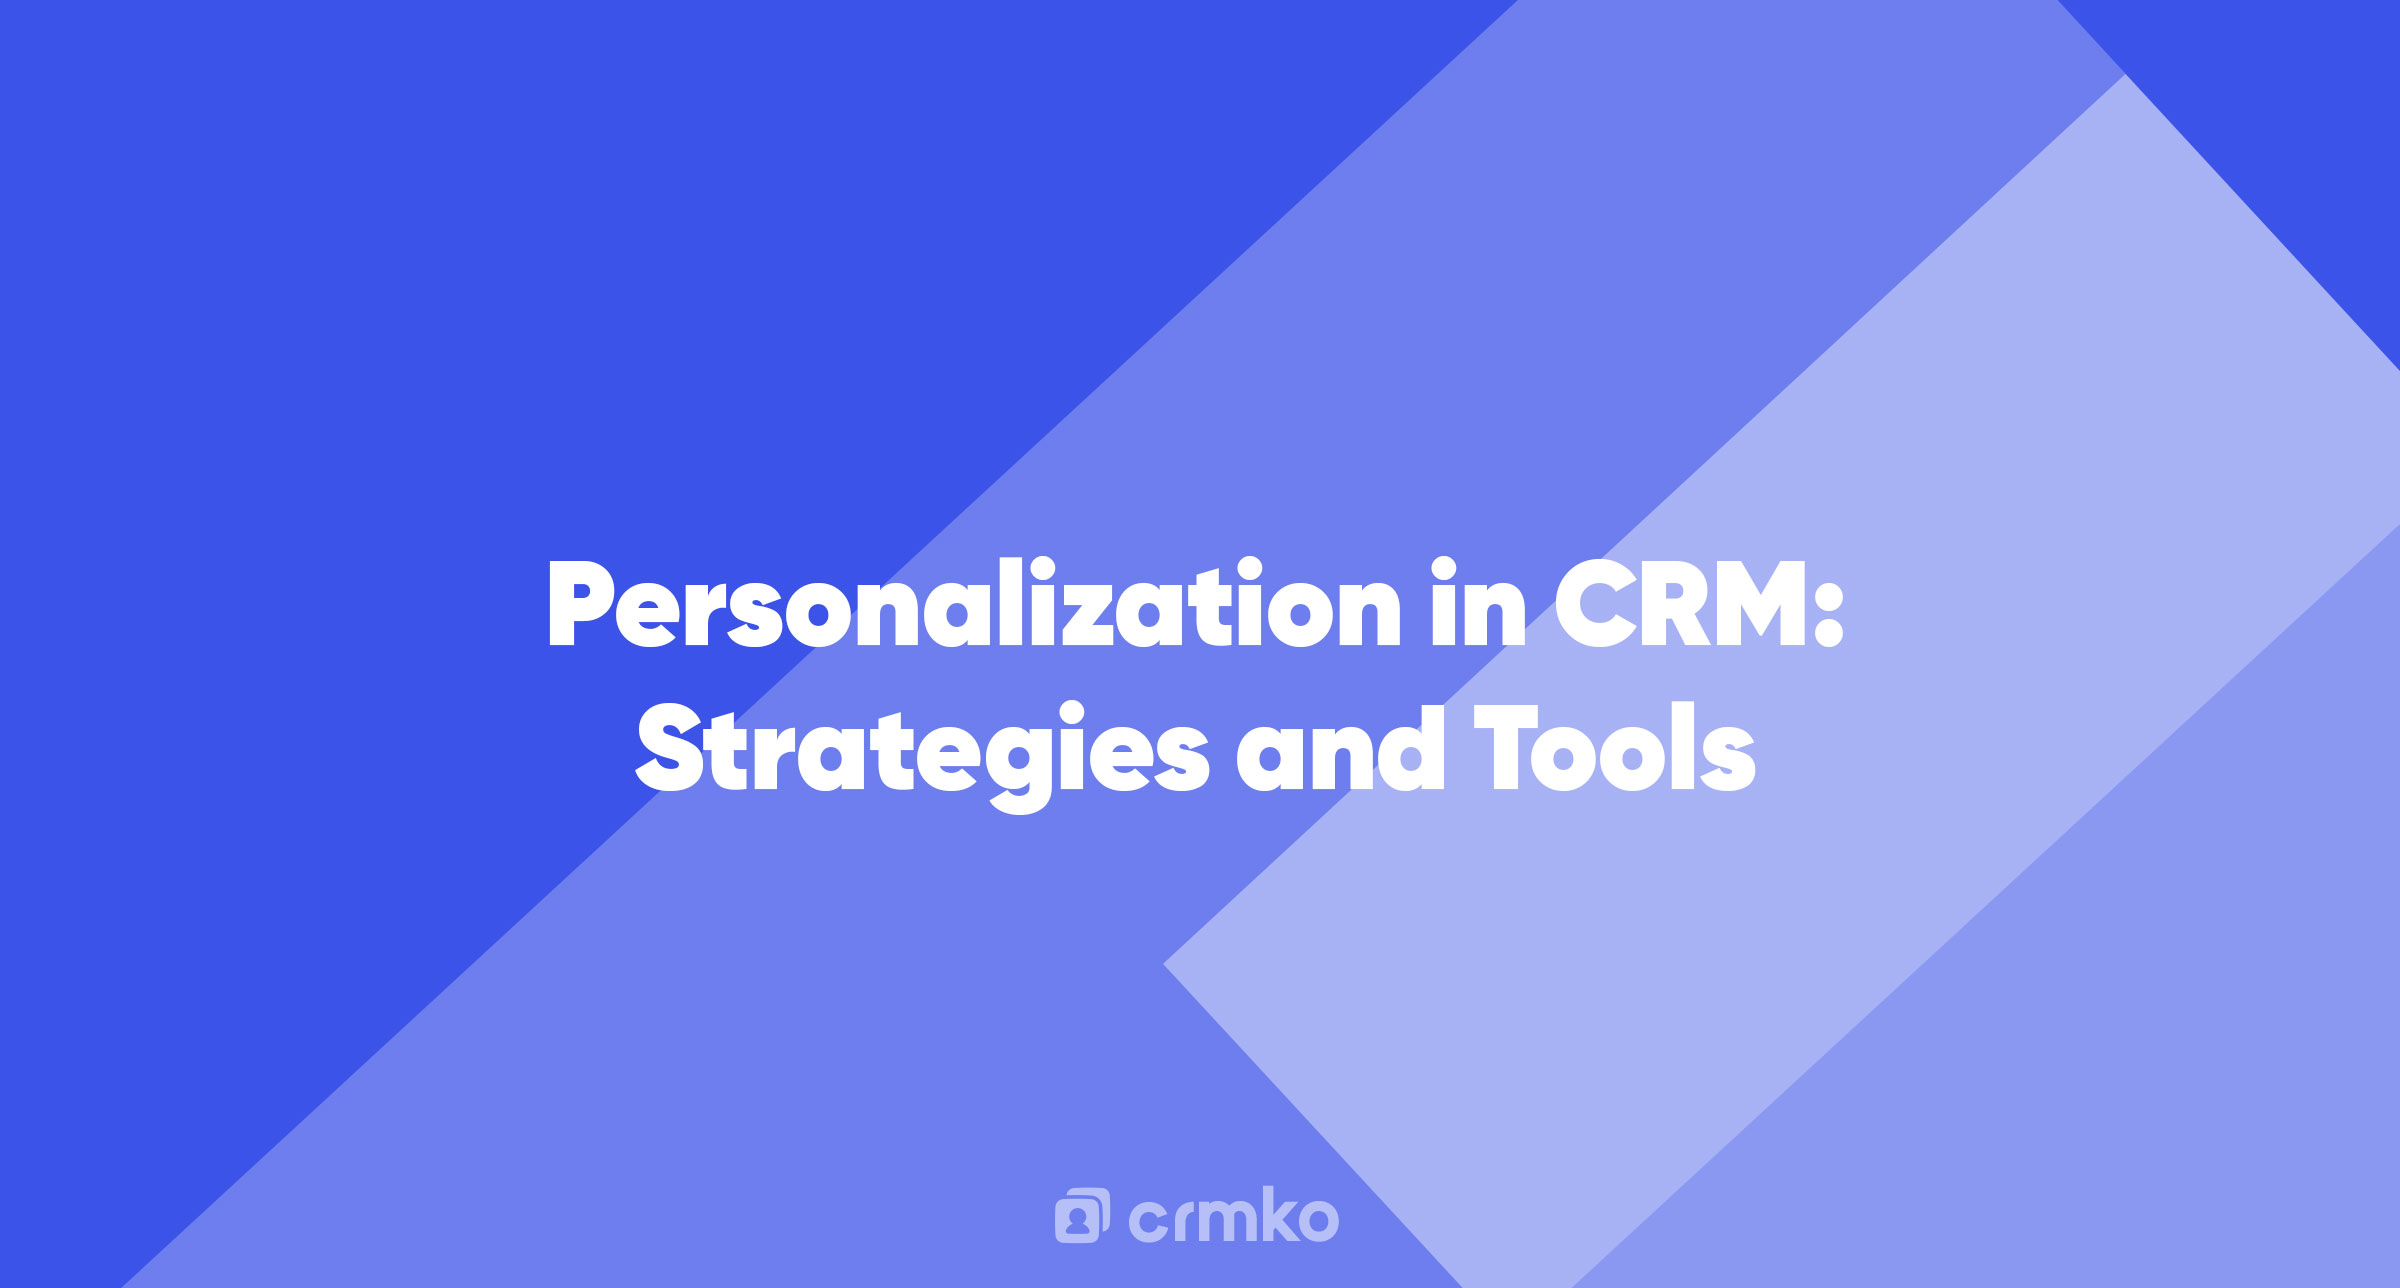 Article | Personalization in CRM: Strategies and Tools